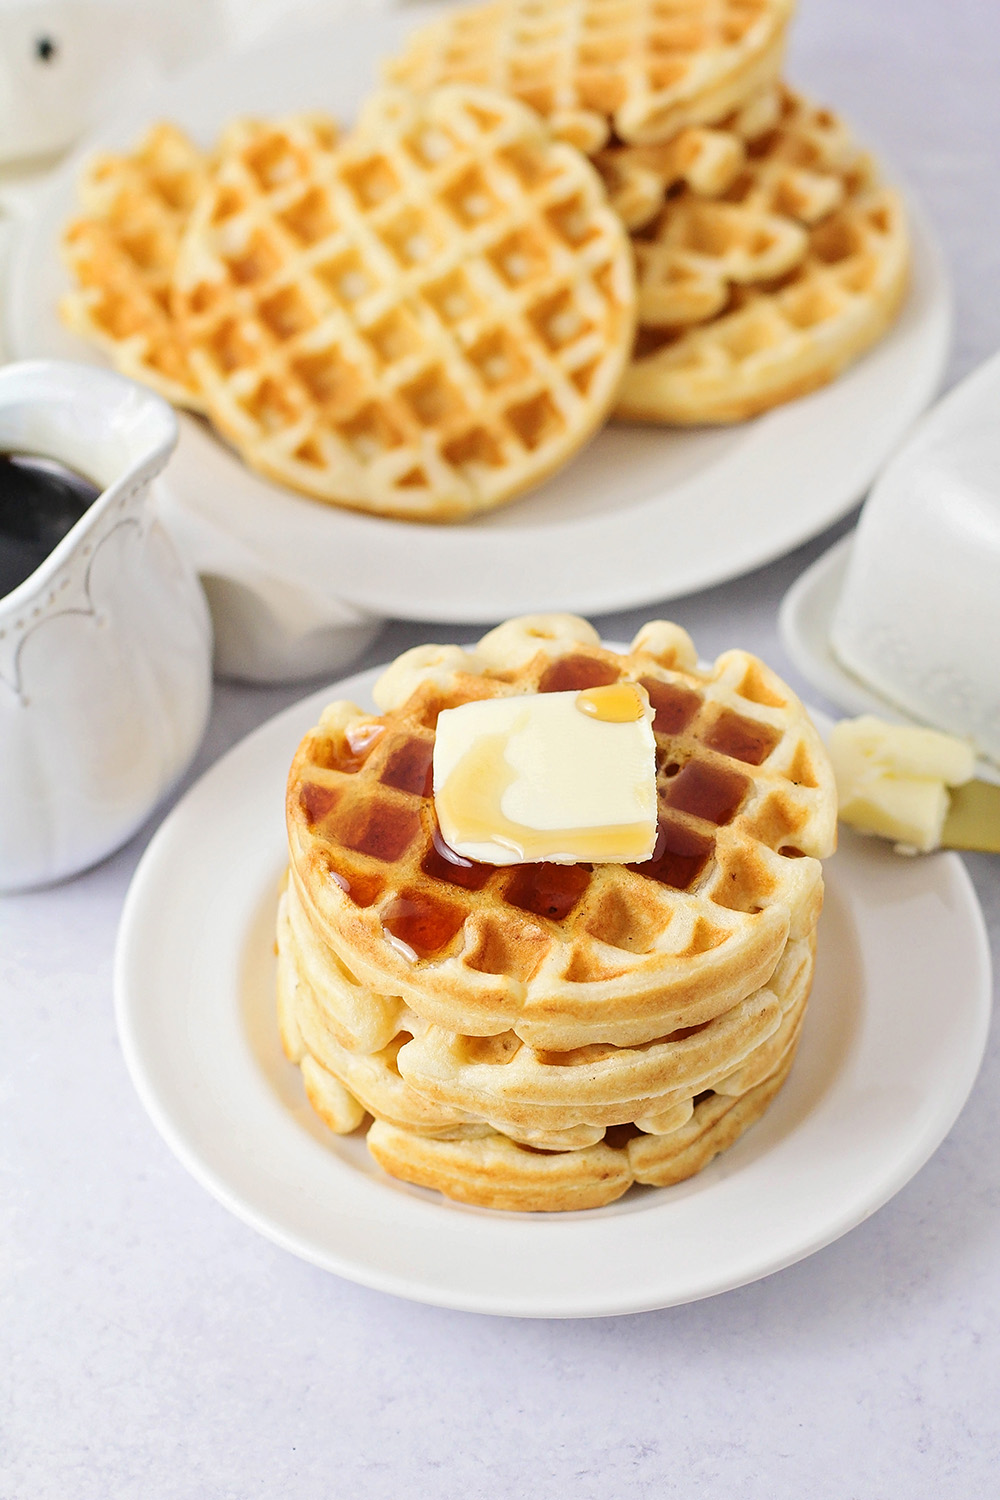 These homemade Eggo waffles are so easy to make and taste way better than store-bought!